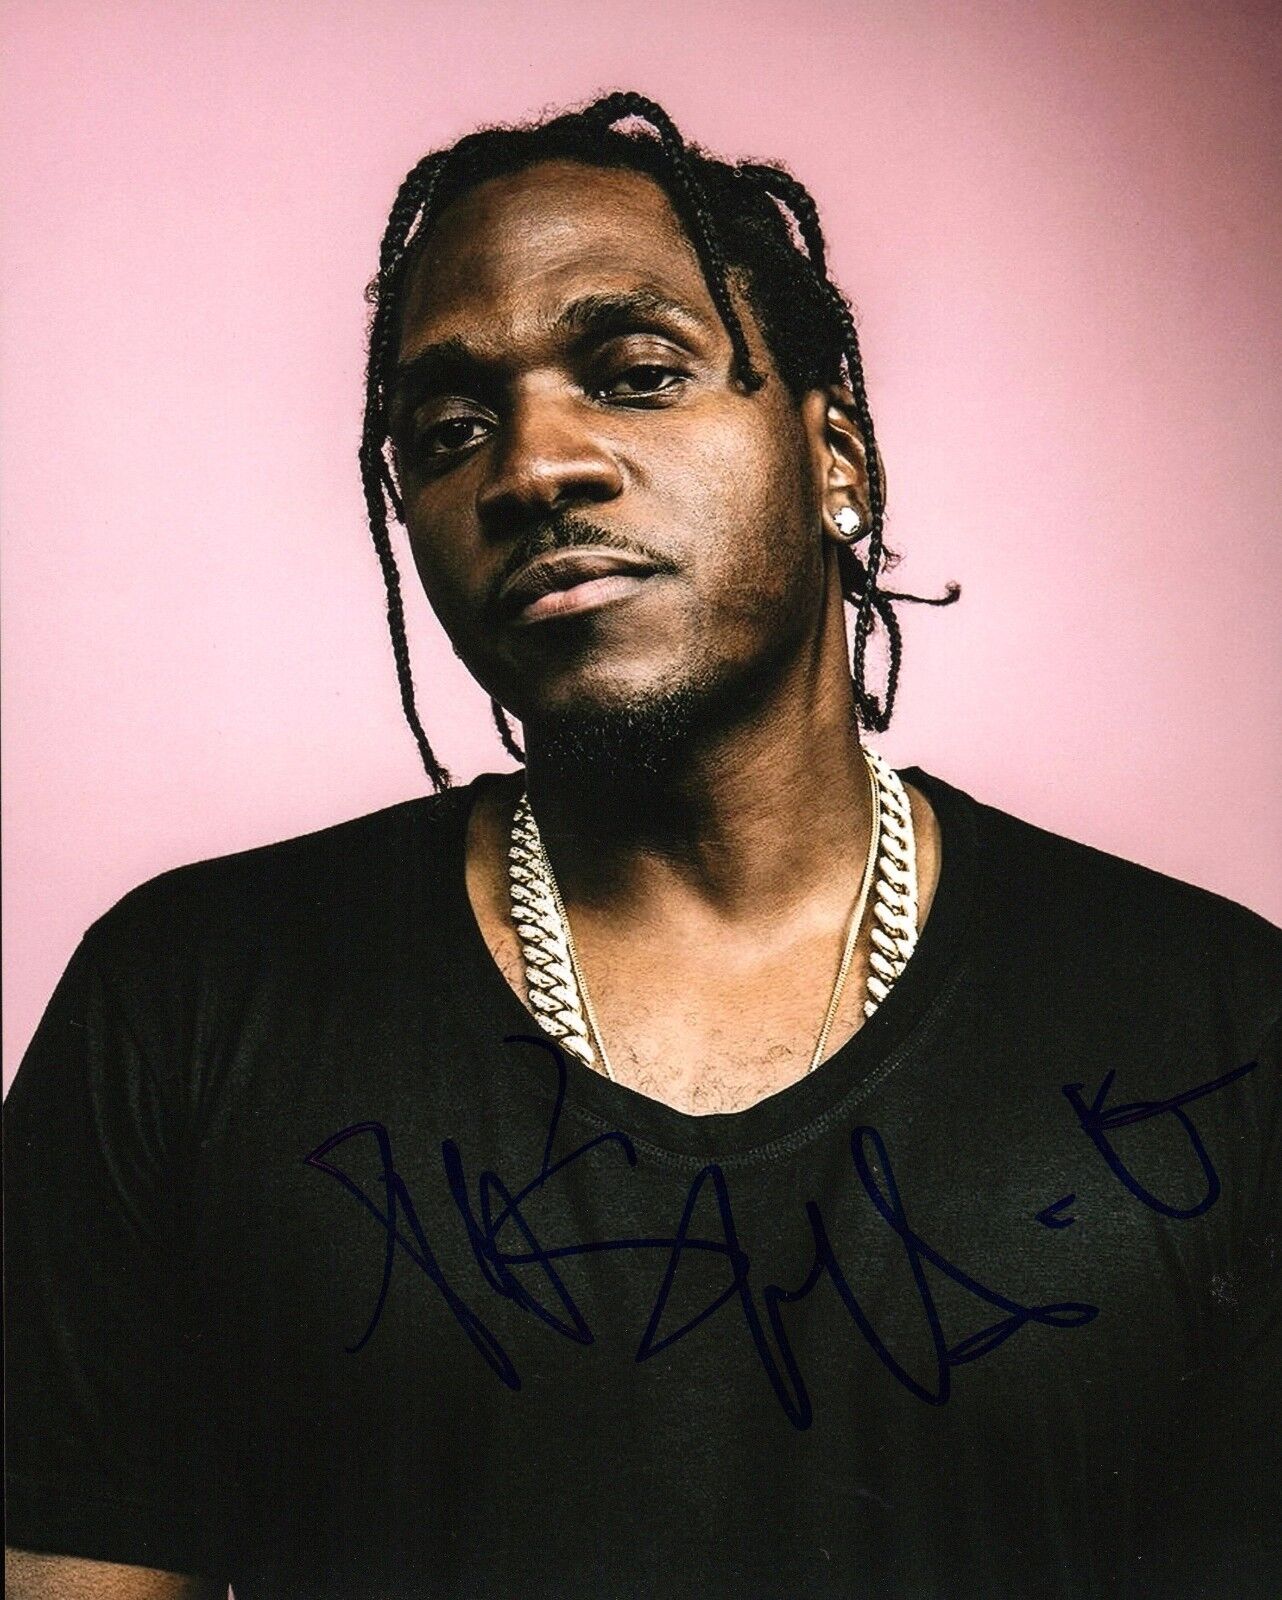 GFA Clipse GOOD Music * PUSHA T * Signed Autographed 8x10 Photo Poster painting AD3 COA